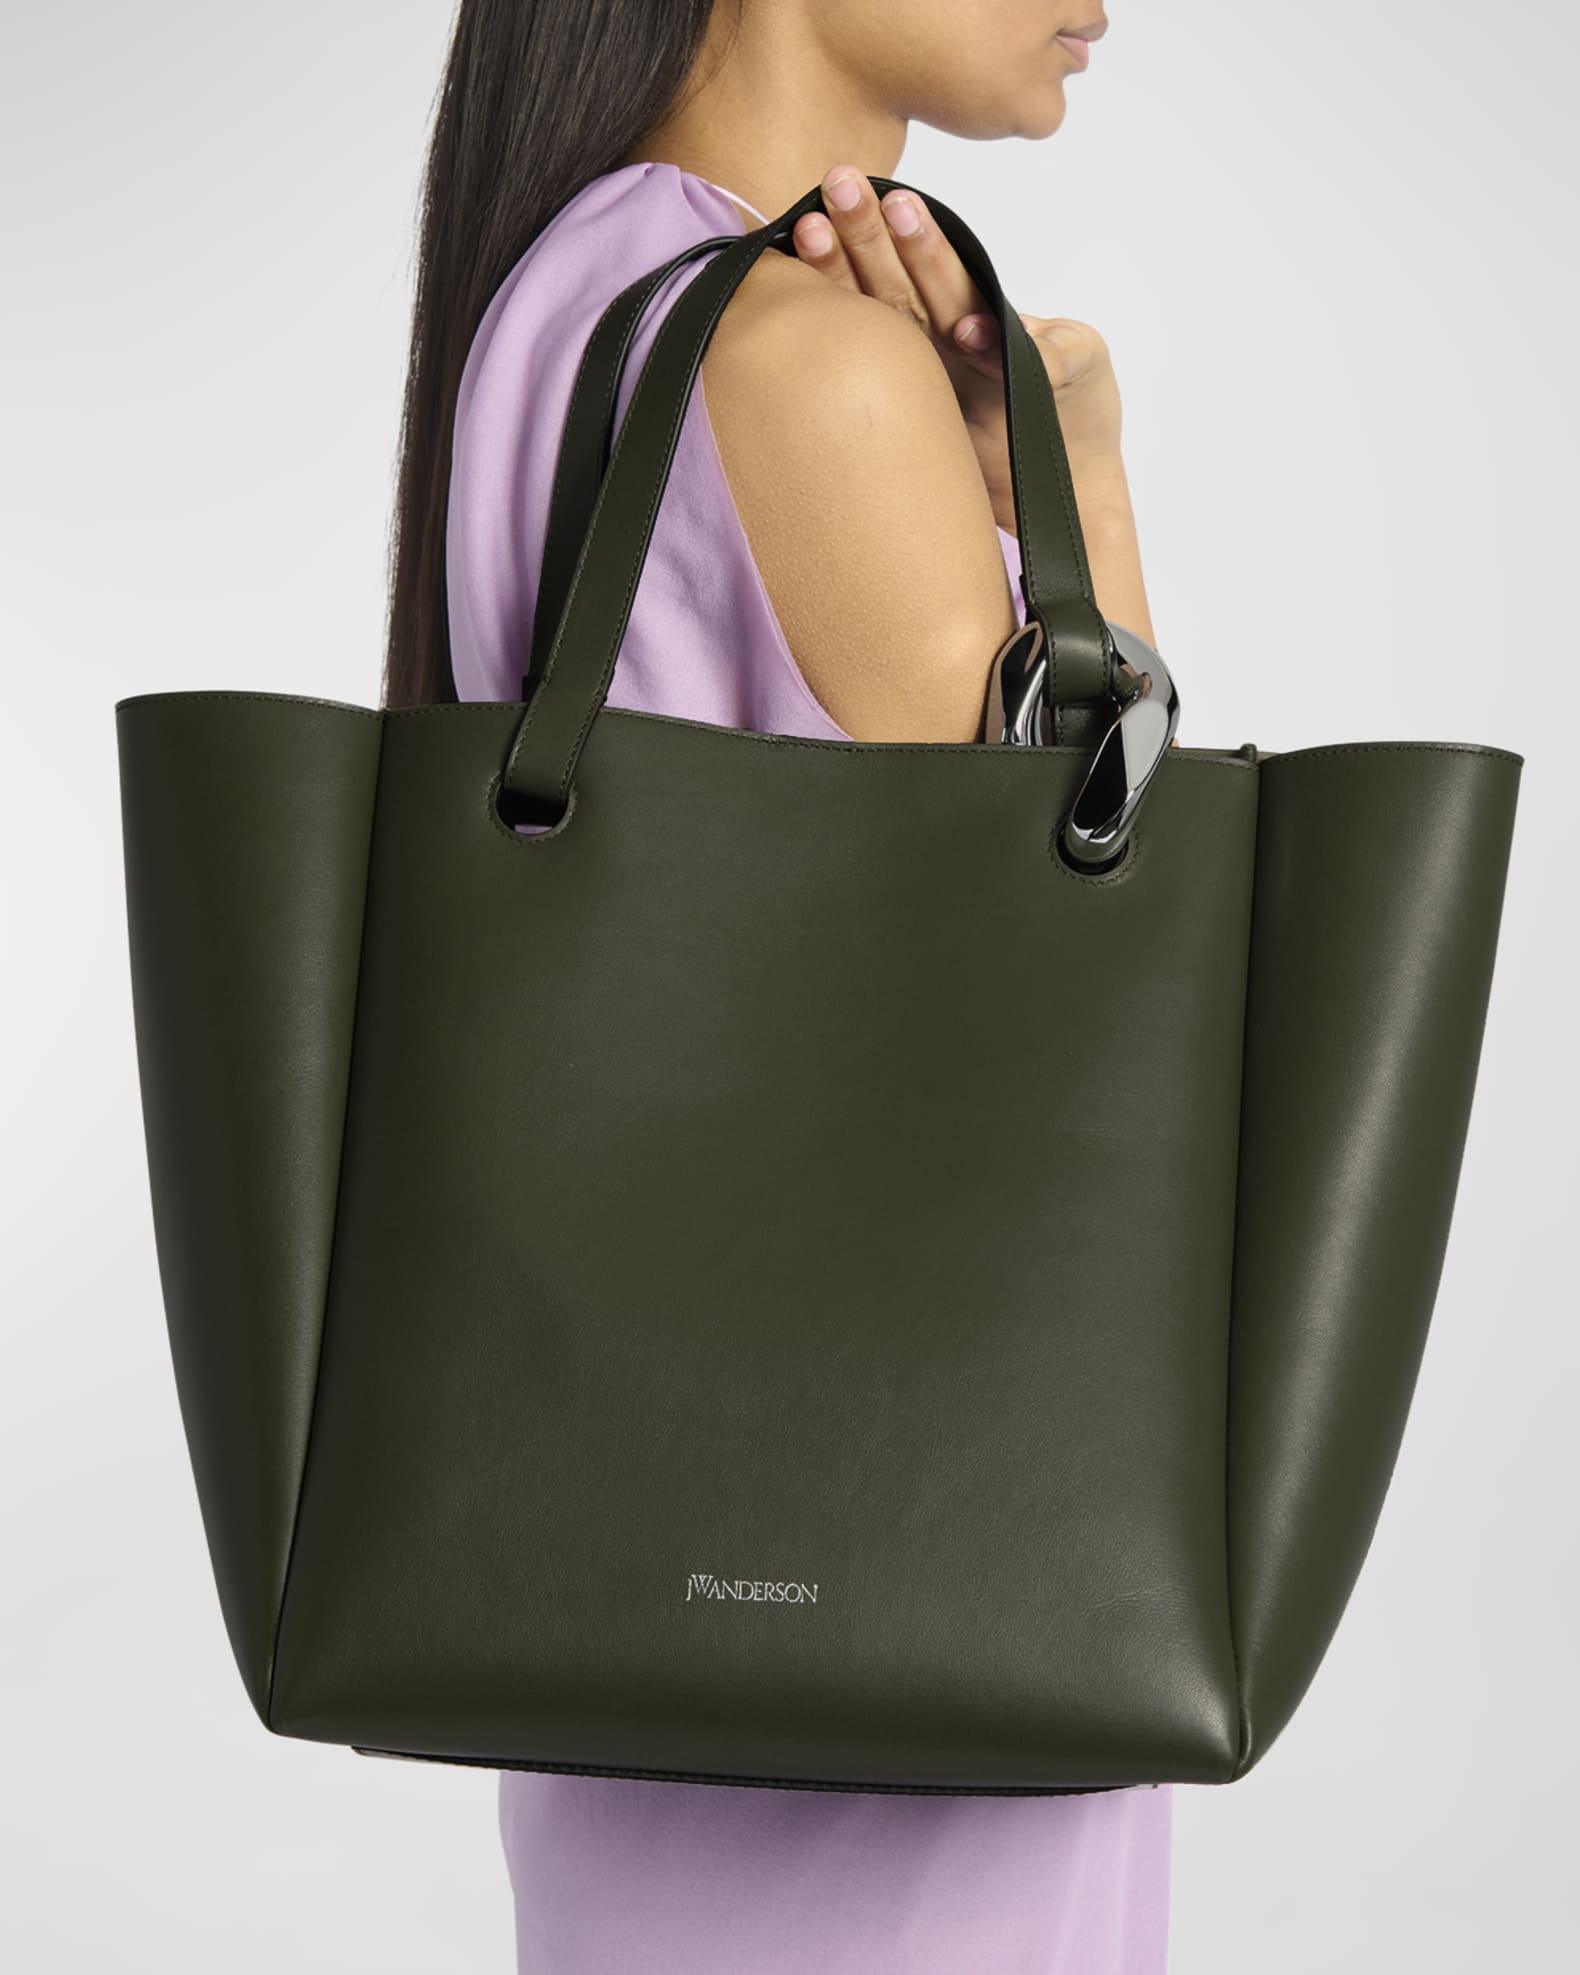 J.w.anderson Leather Tote Bag